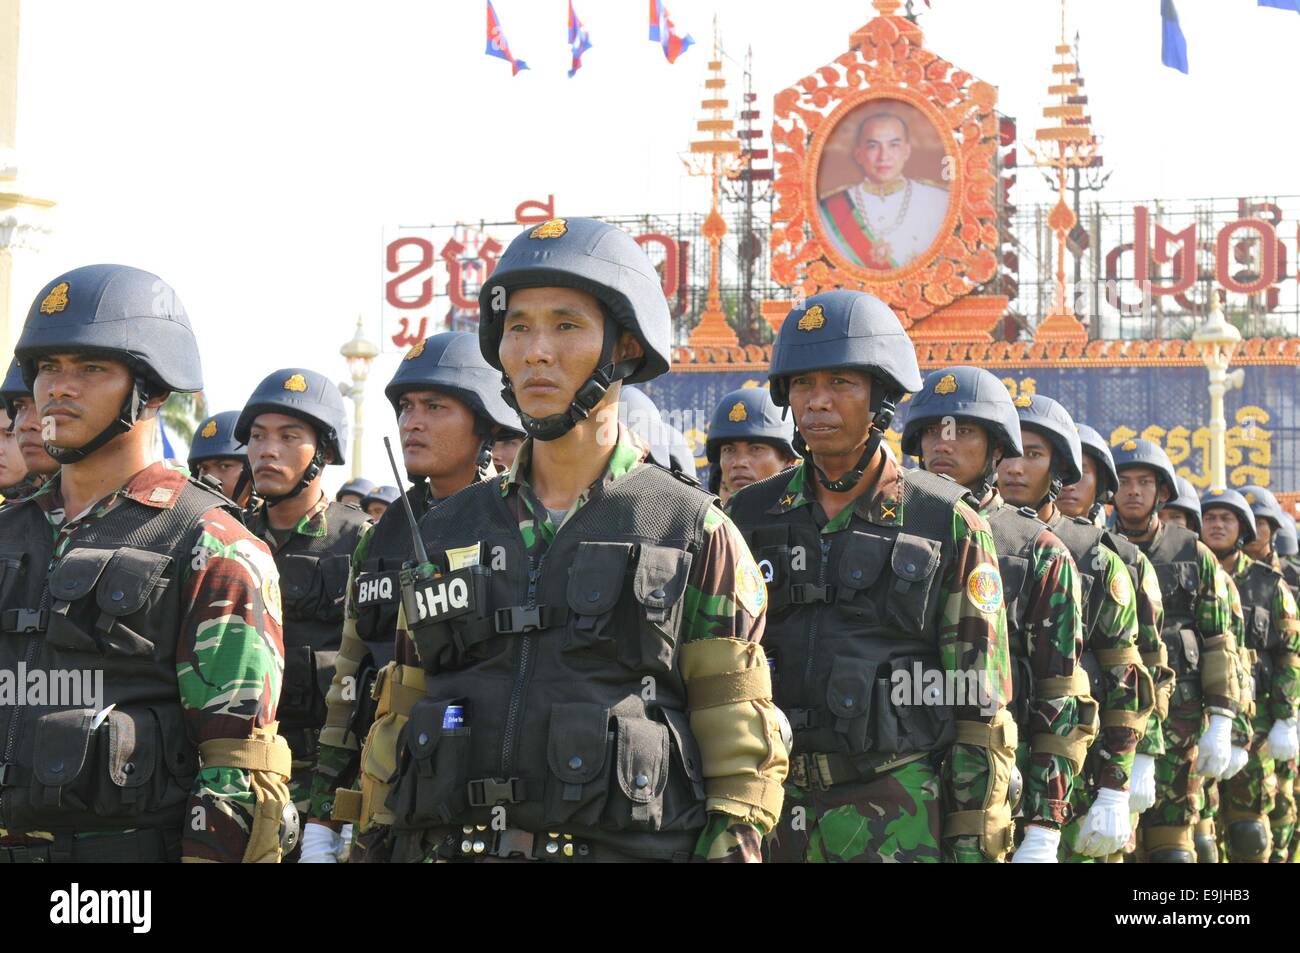 Phnom Penh. 29th Oct, 2014. Soldiers take part in the celebration for the 10th anniversary of Cambodian King Norodom Sihamoni's coronation in Phnom Penh Oct. 29, 2014. Cambodia on Wednesday celebrated the 10th anniversary of King Norodom Sihamoni's coronation, urging people to continue uniting for national peace and development. Credit:  Sovannara/Xinhua/Alamy Live News Stock Photo